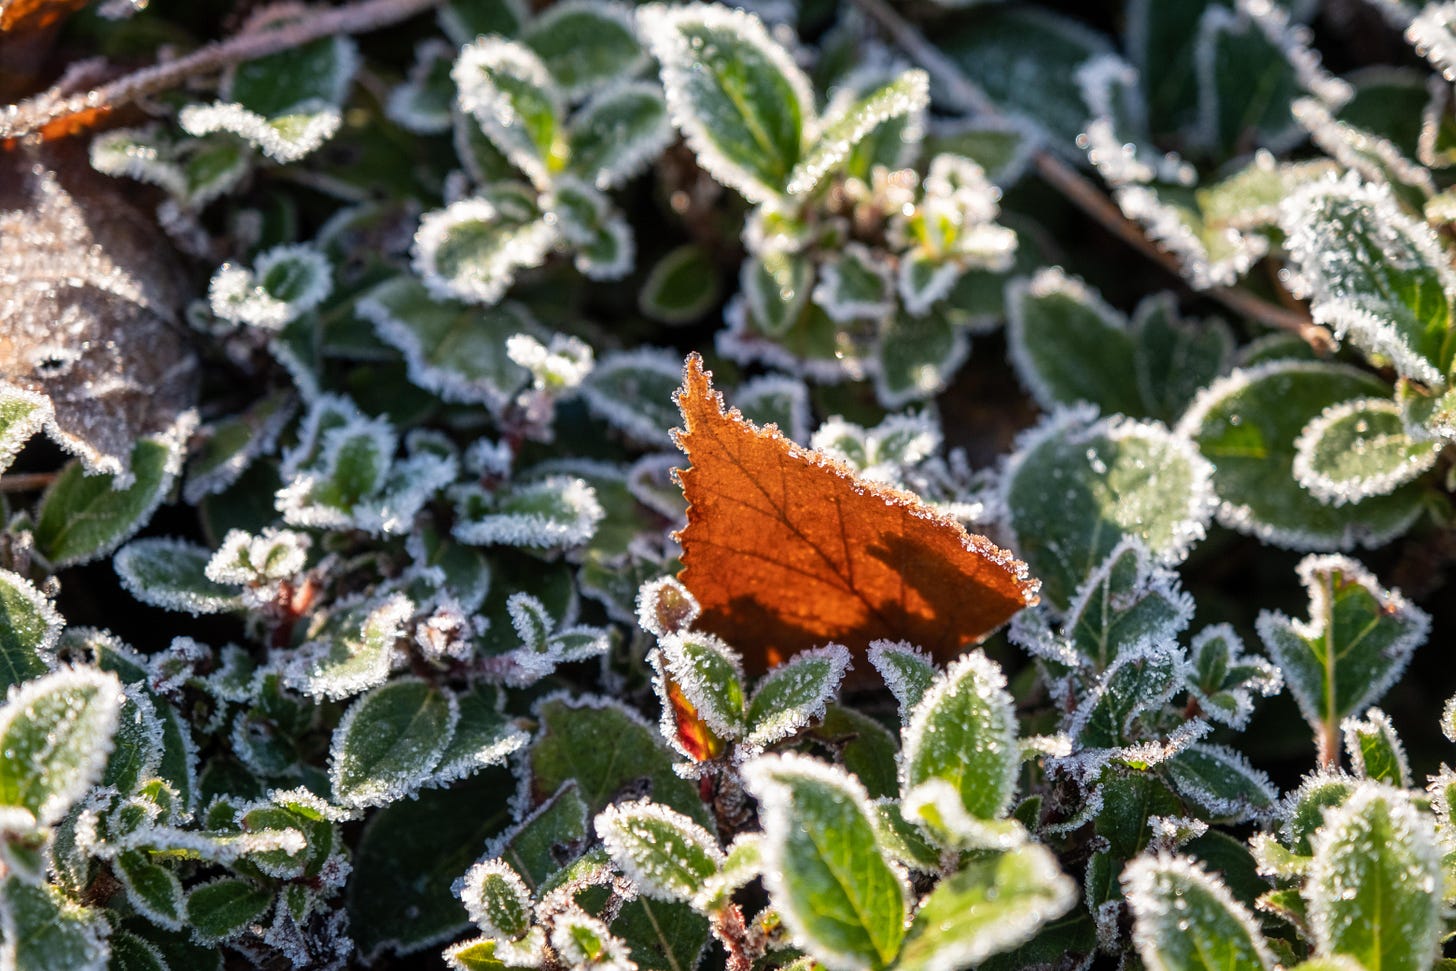 Picture credits: Gras, L. (2021). Leaves and frost.